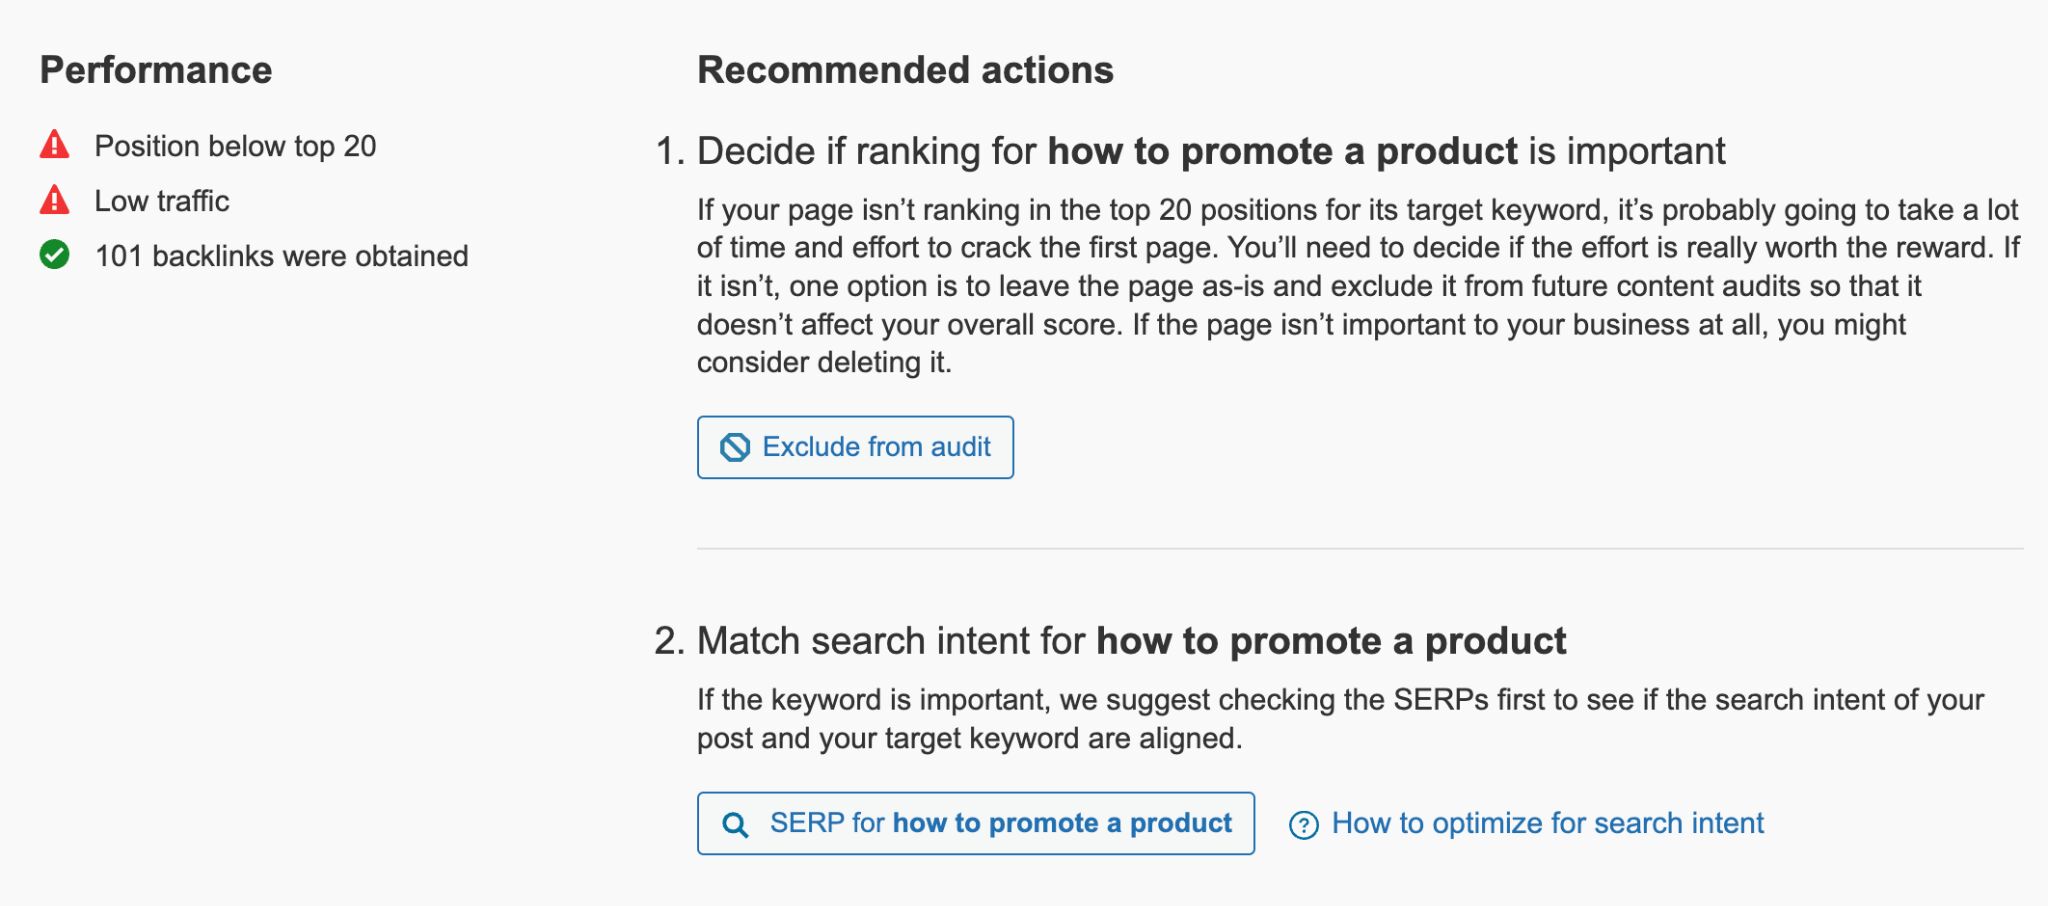 The recommended next steps after the content audit